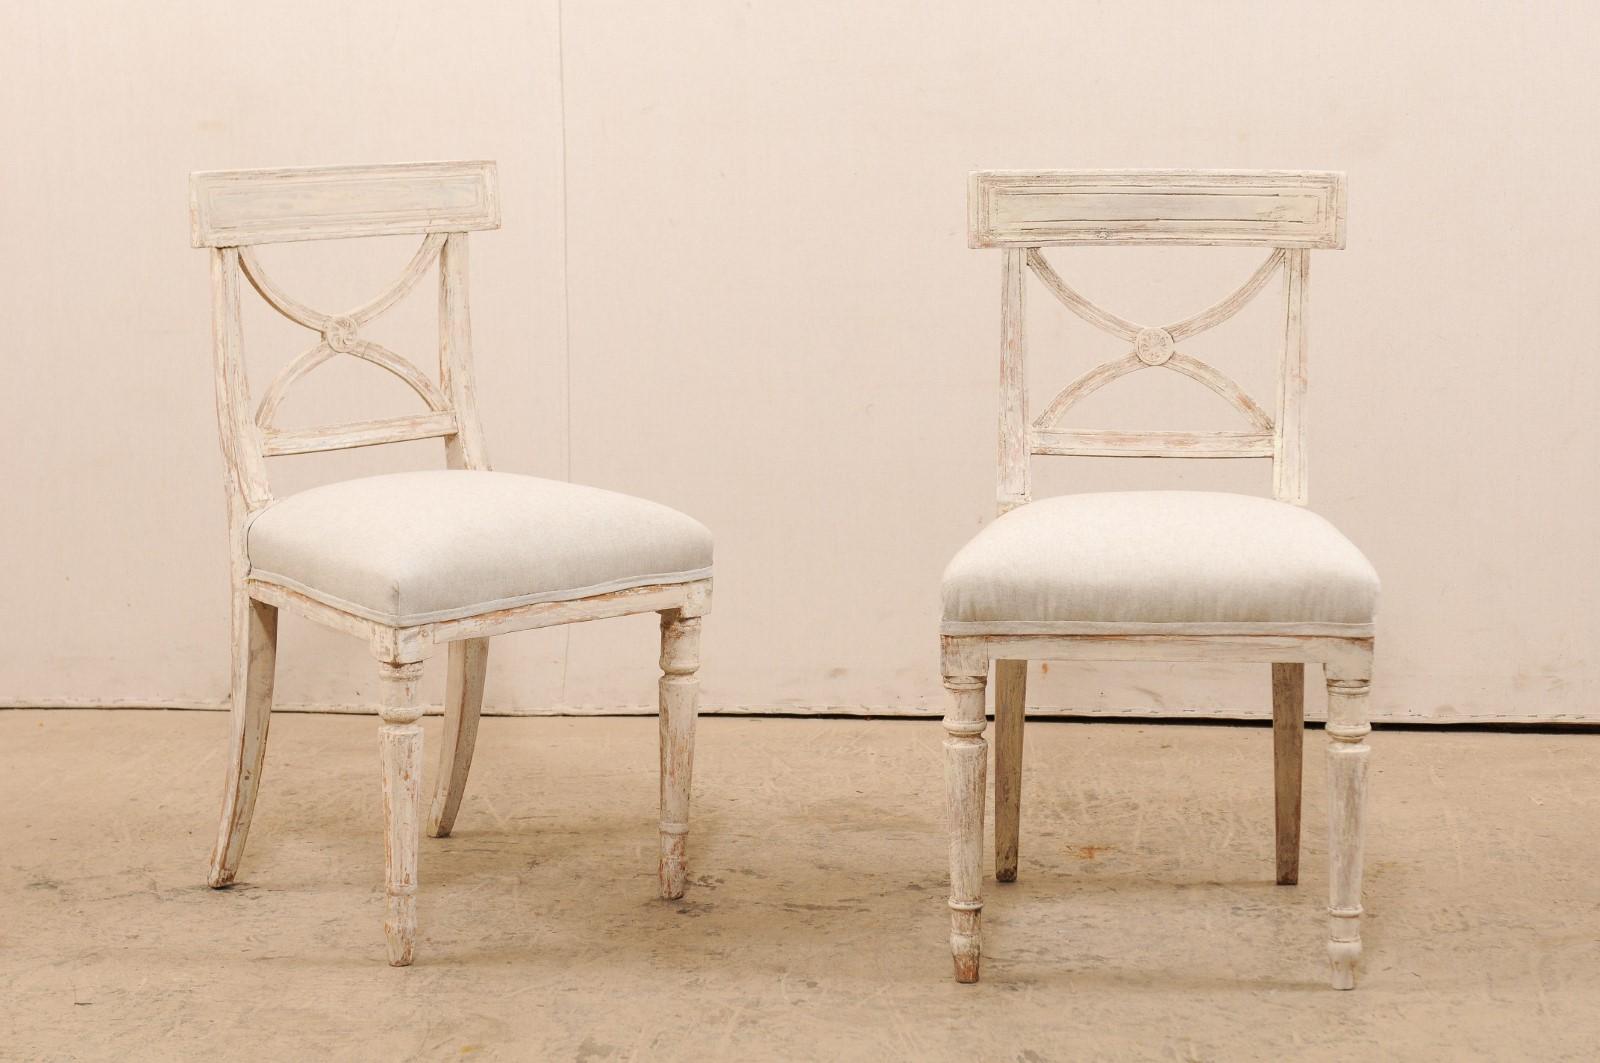 A pair of Swedish period Gustavian side chairs from the 19th century. These antique chairs from Sweden have an airy design quality to them with their open style backs, topped with a rectangular-shaped upper top rail which frames the elegant cutout